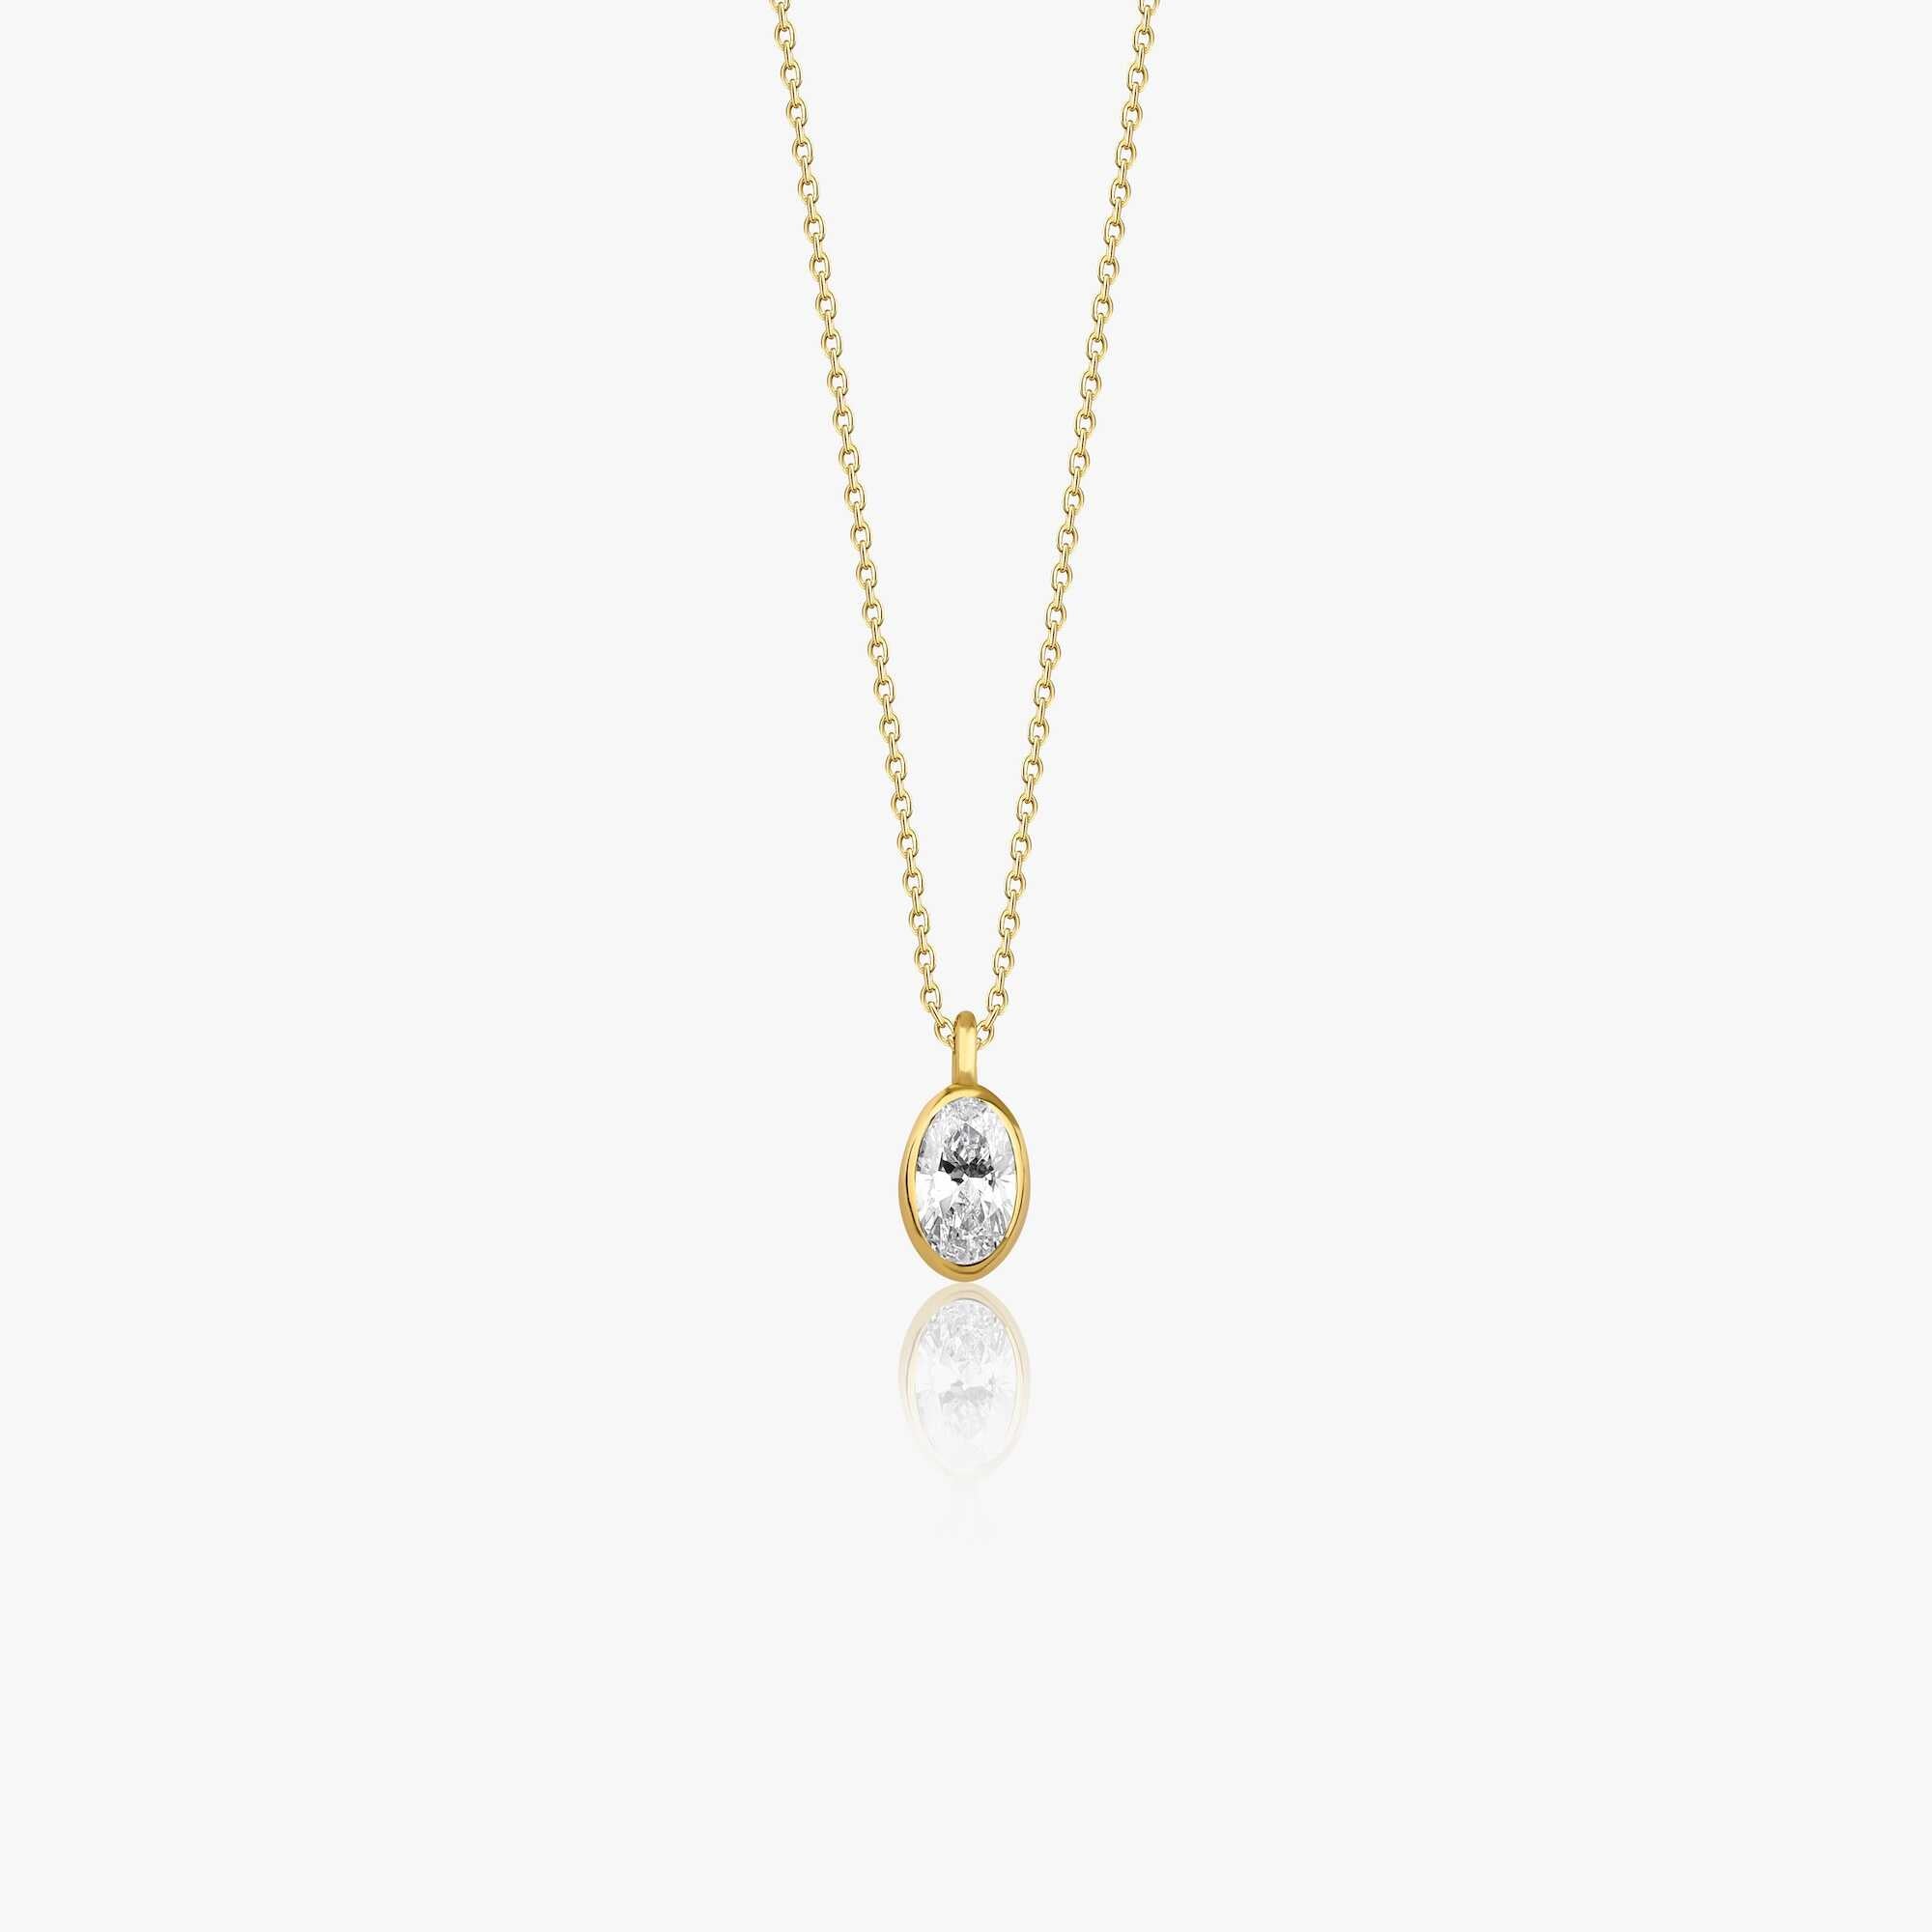 Oval Cut Diamond Solitaire Necklace Available in 14K and 18K Gold